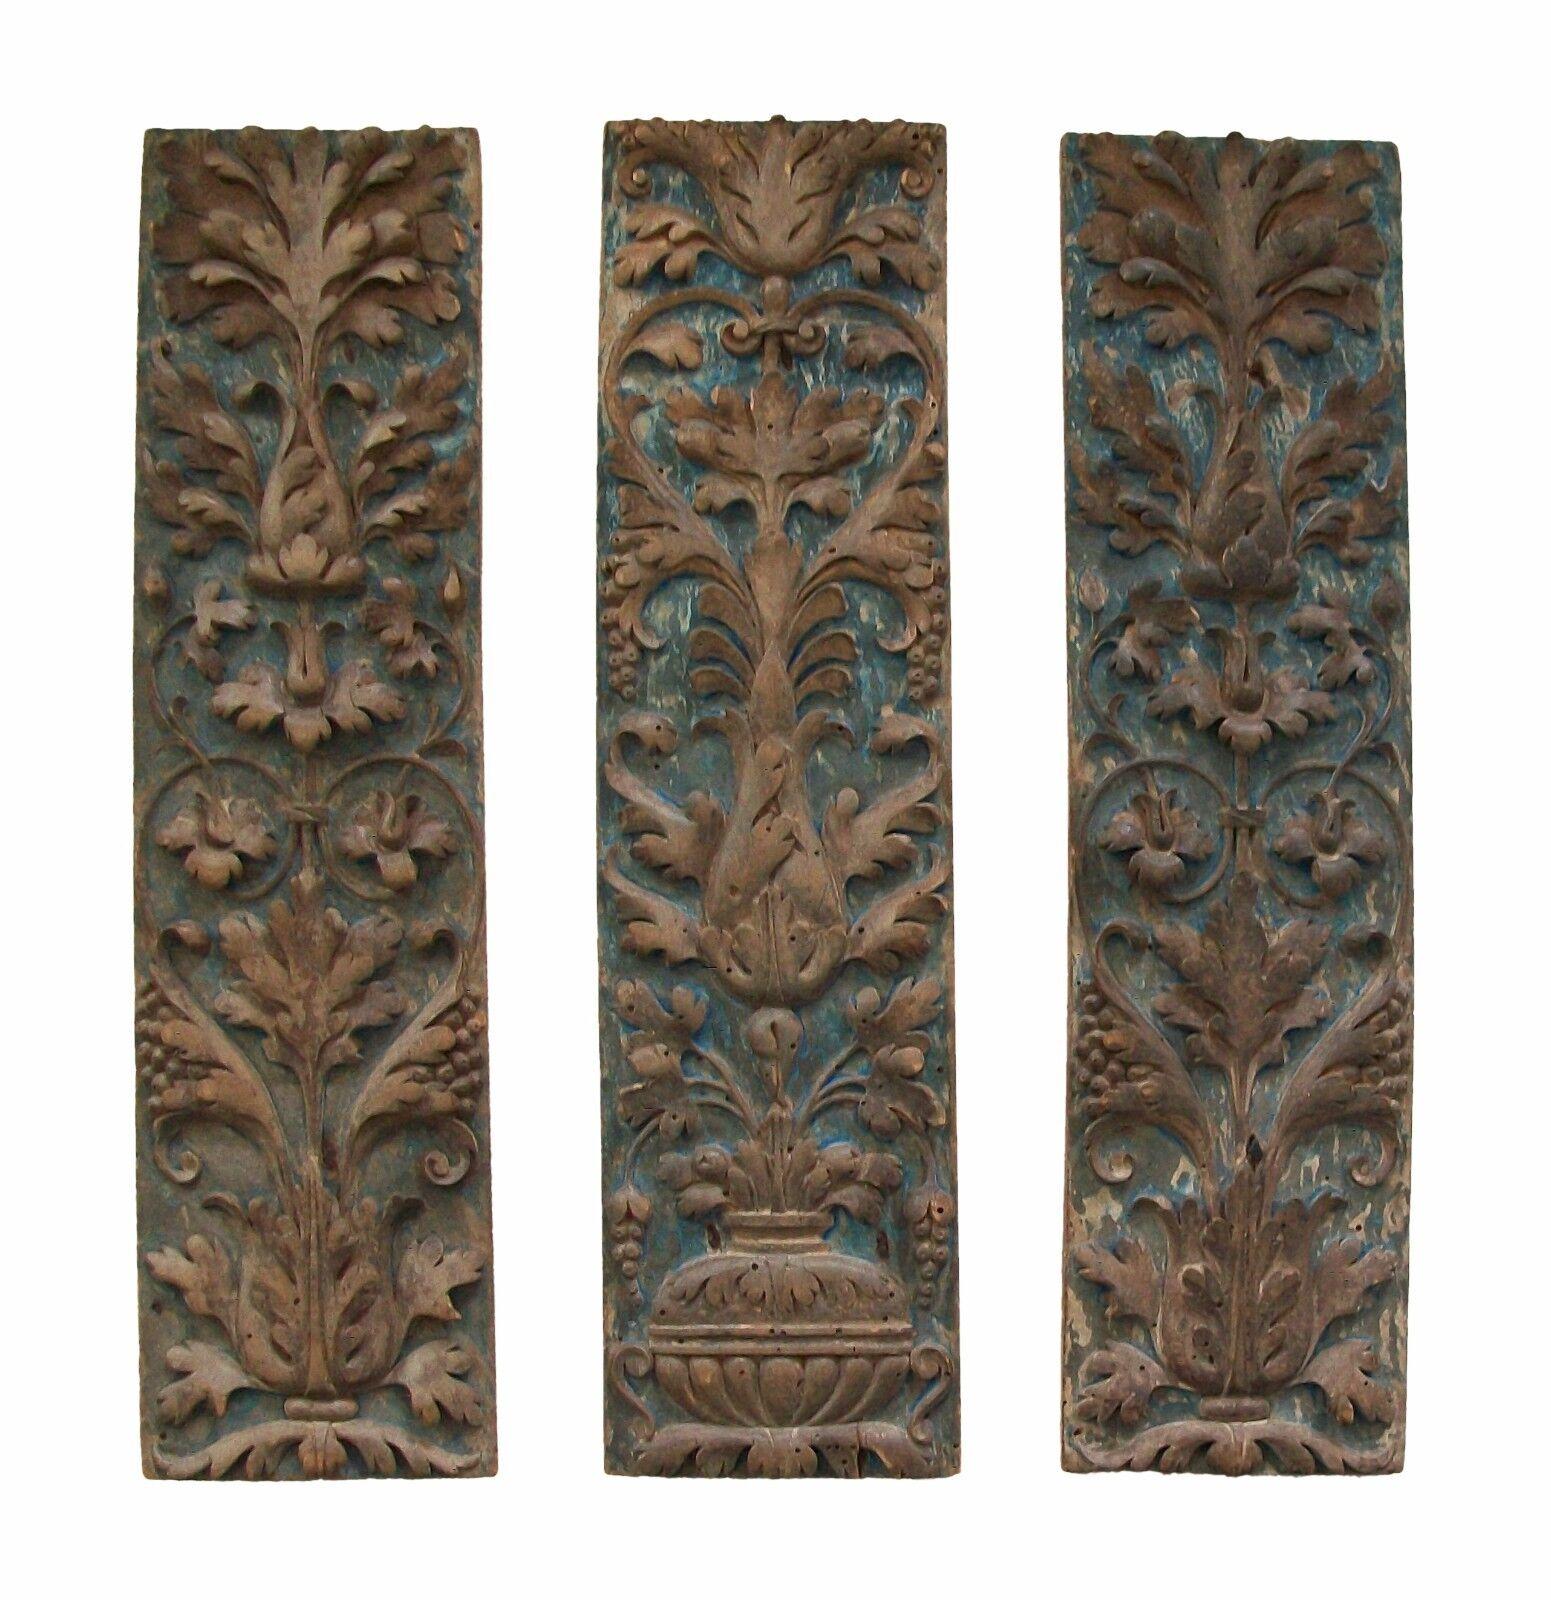 Hand-Carved Renaissance Carved & Painted Fruitwood Panels, Signed, France, 16th Century